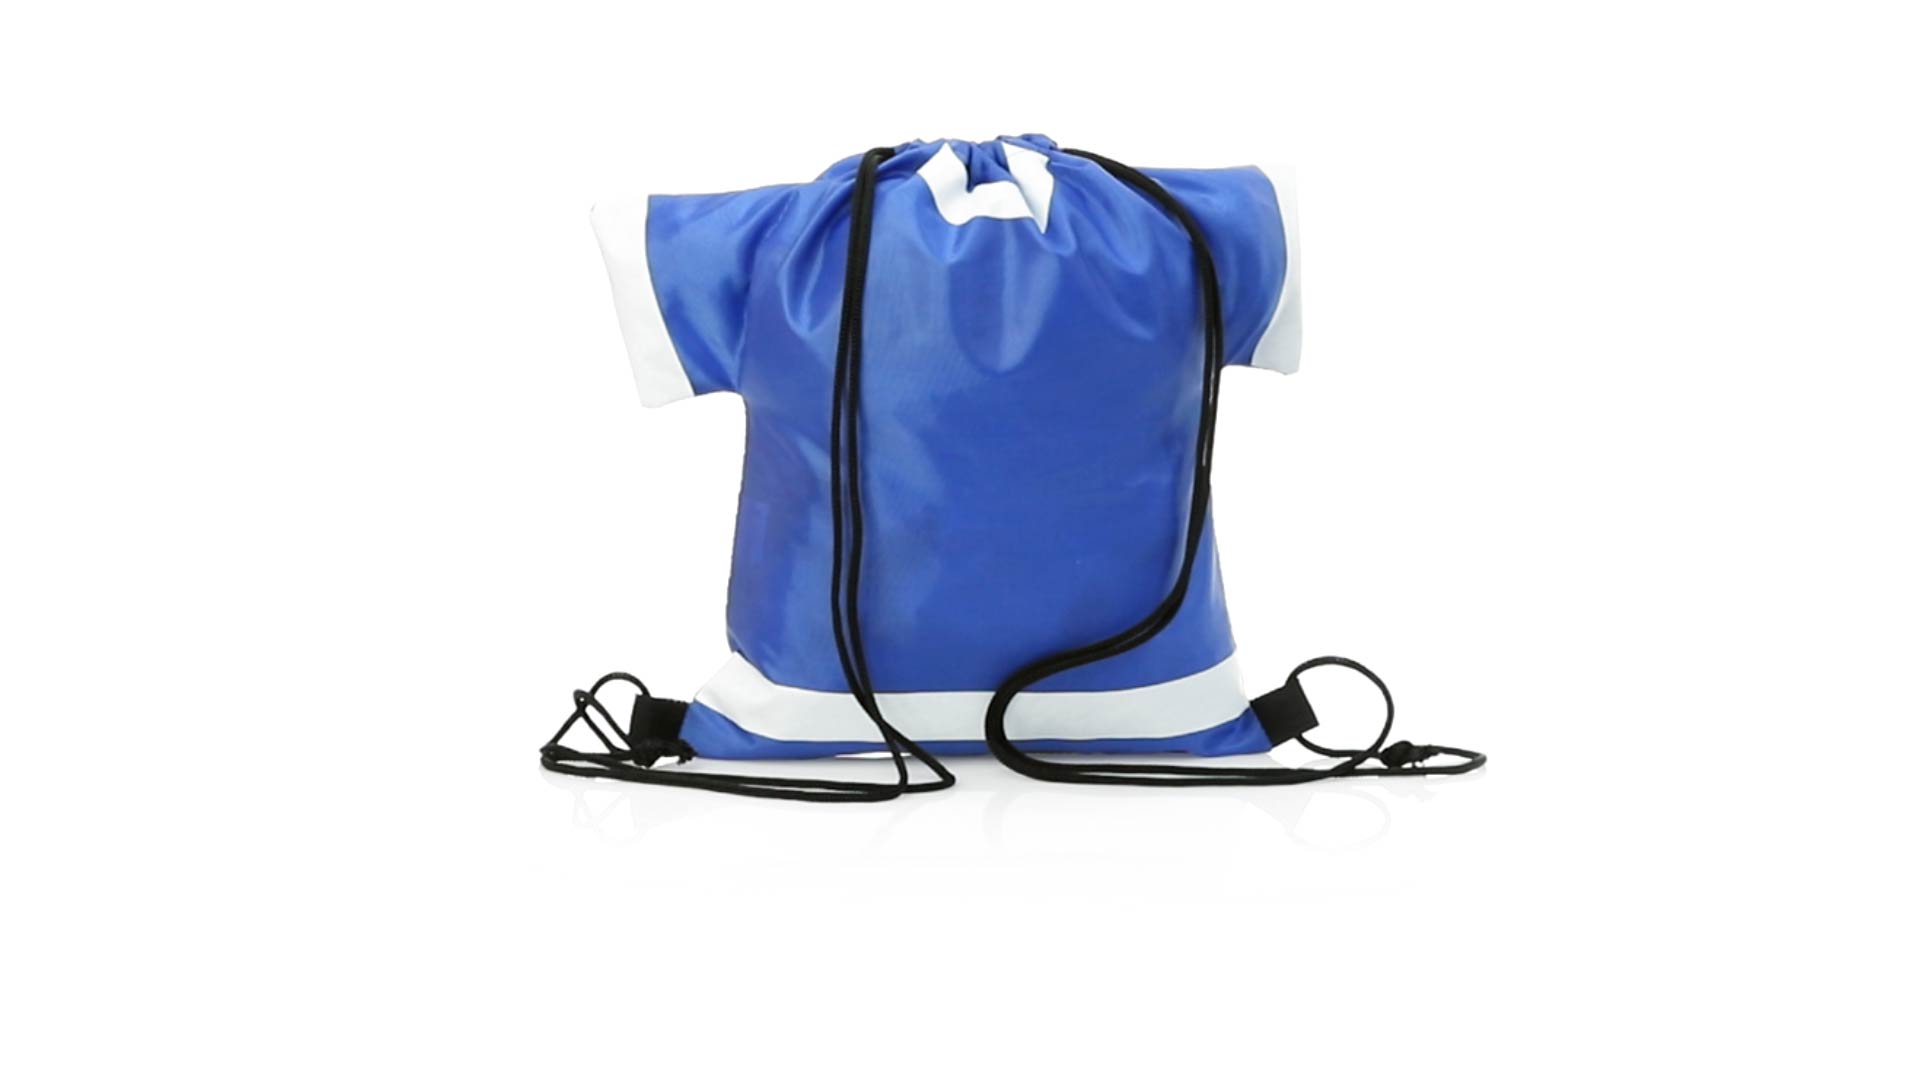 A drawstring backpack designed to look like a unique adult fun-themed t-shirt - Alton